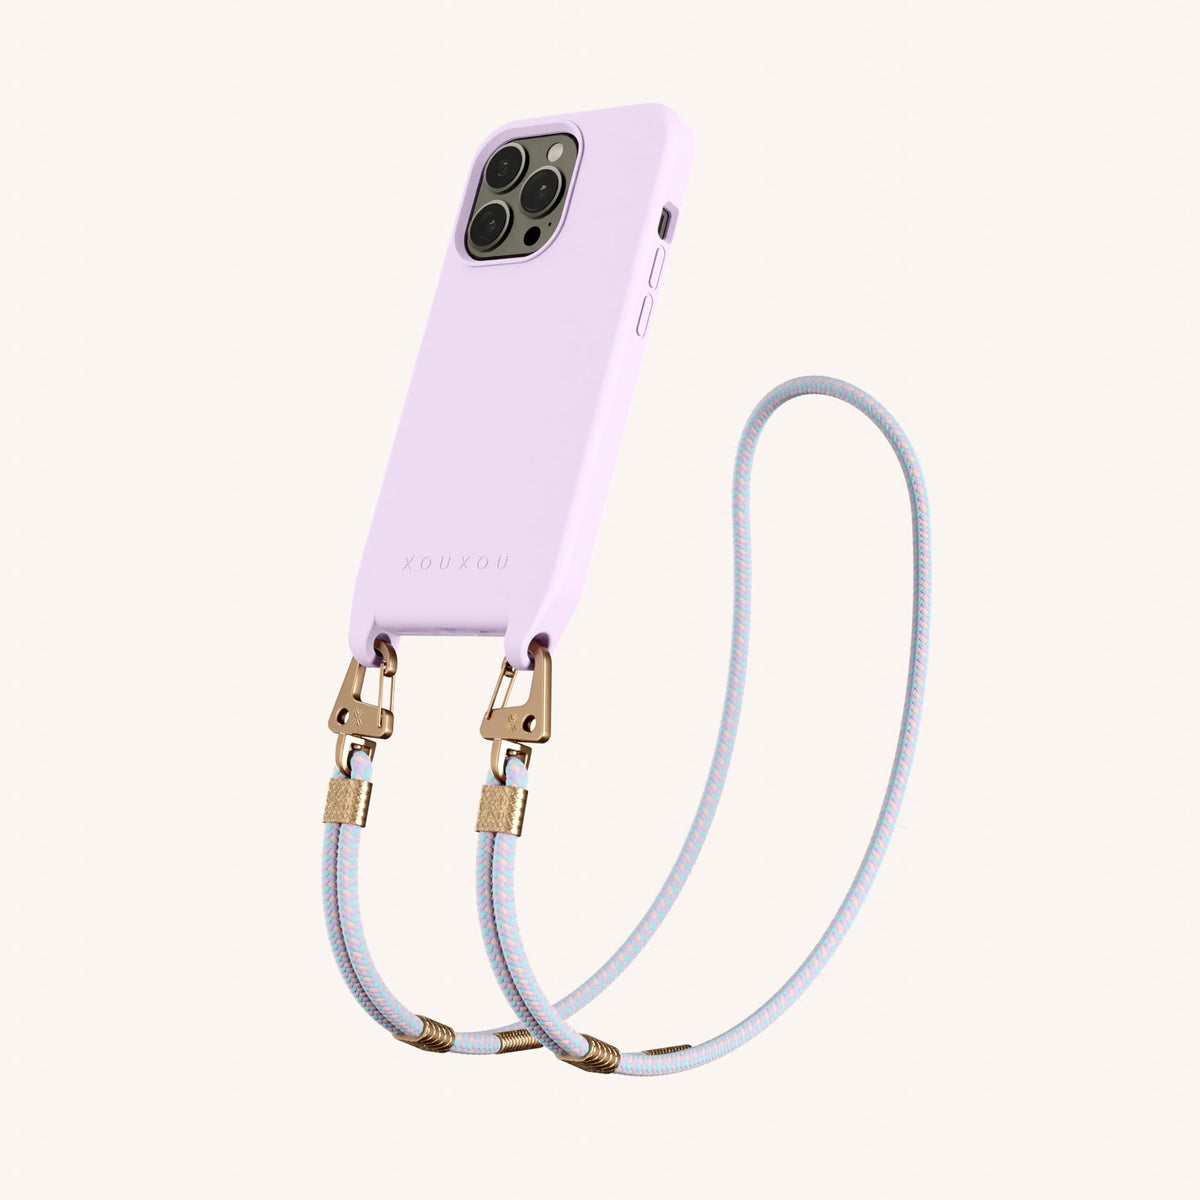 Phone Necklace with Carabiner Rope for iPhone 13 Pro with MagSafe in Lilac + Vibrant Pastel Perspective View | XOUXOU #phone model_iphone 13 pro